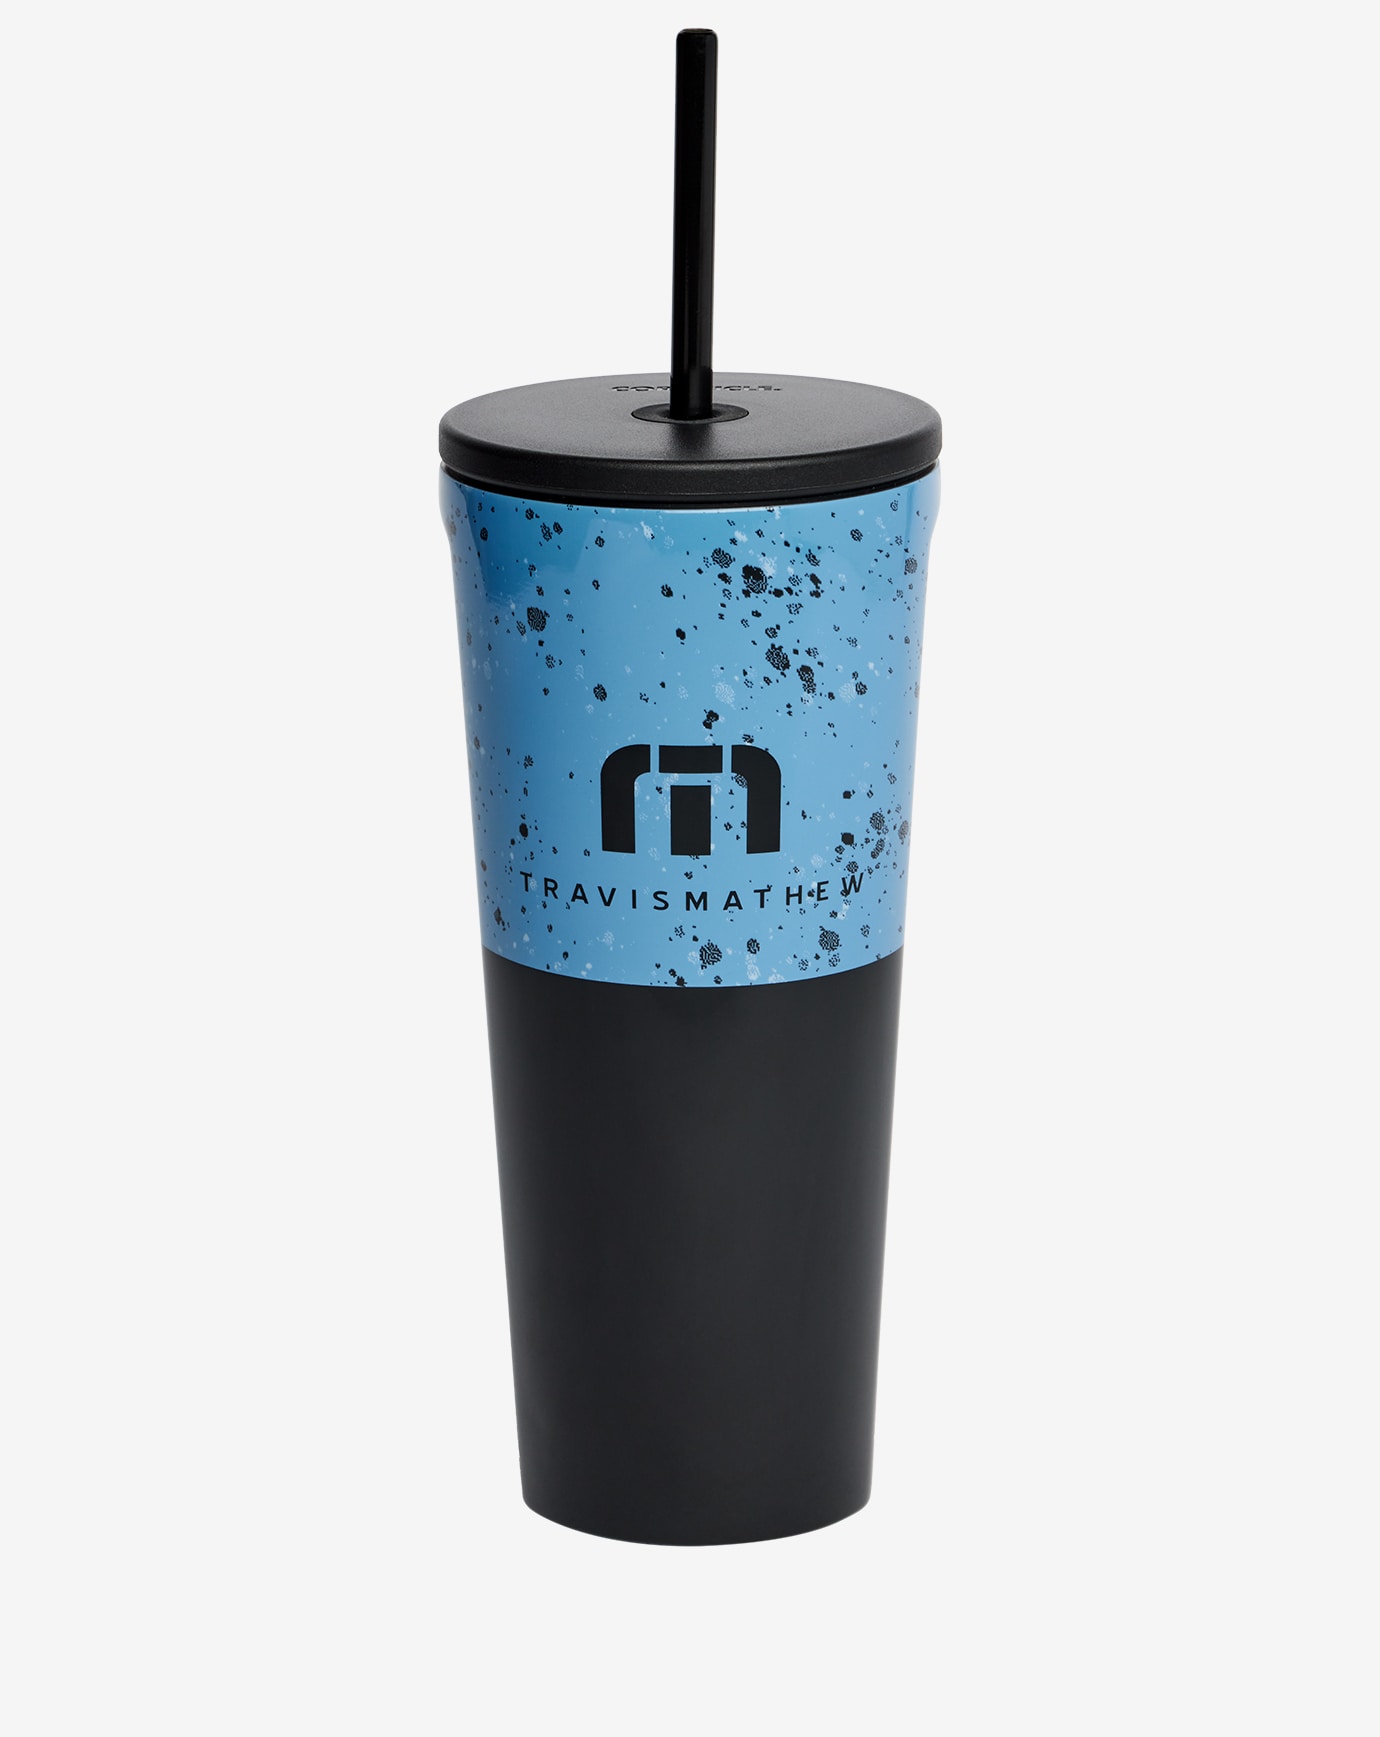 Related Product - PAINT COLD CUP